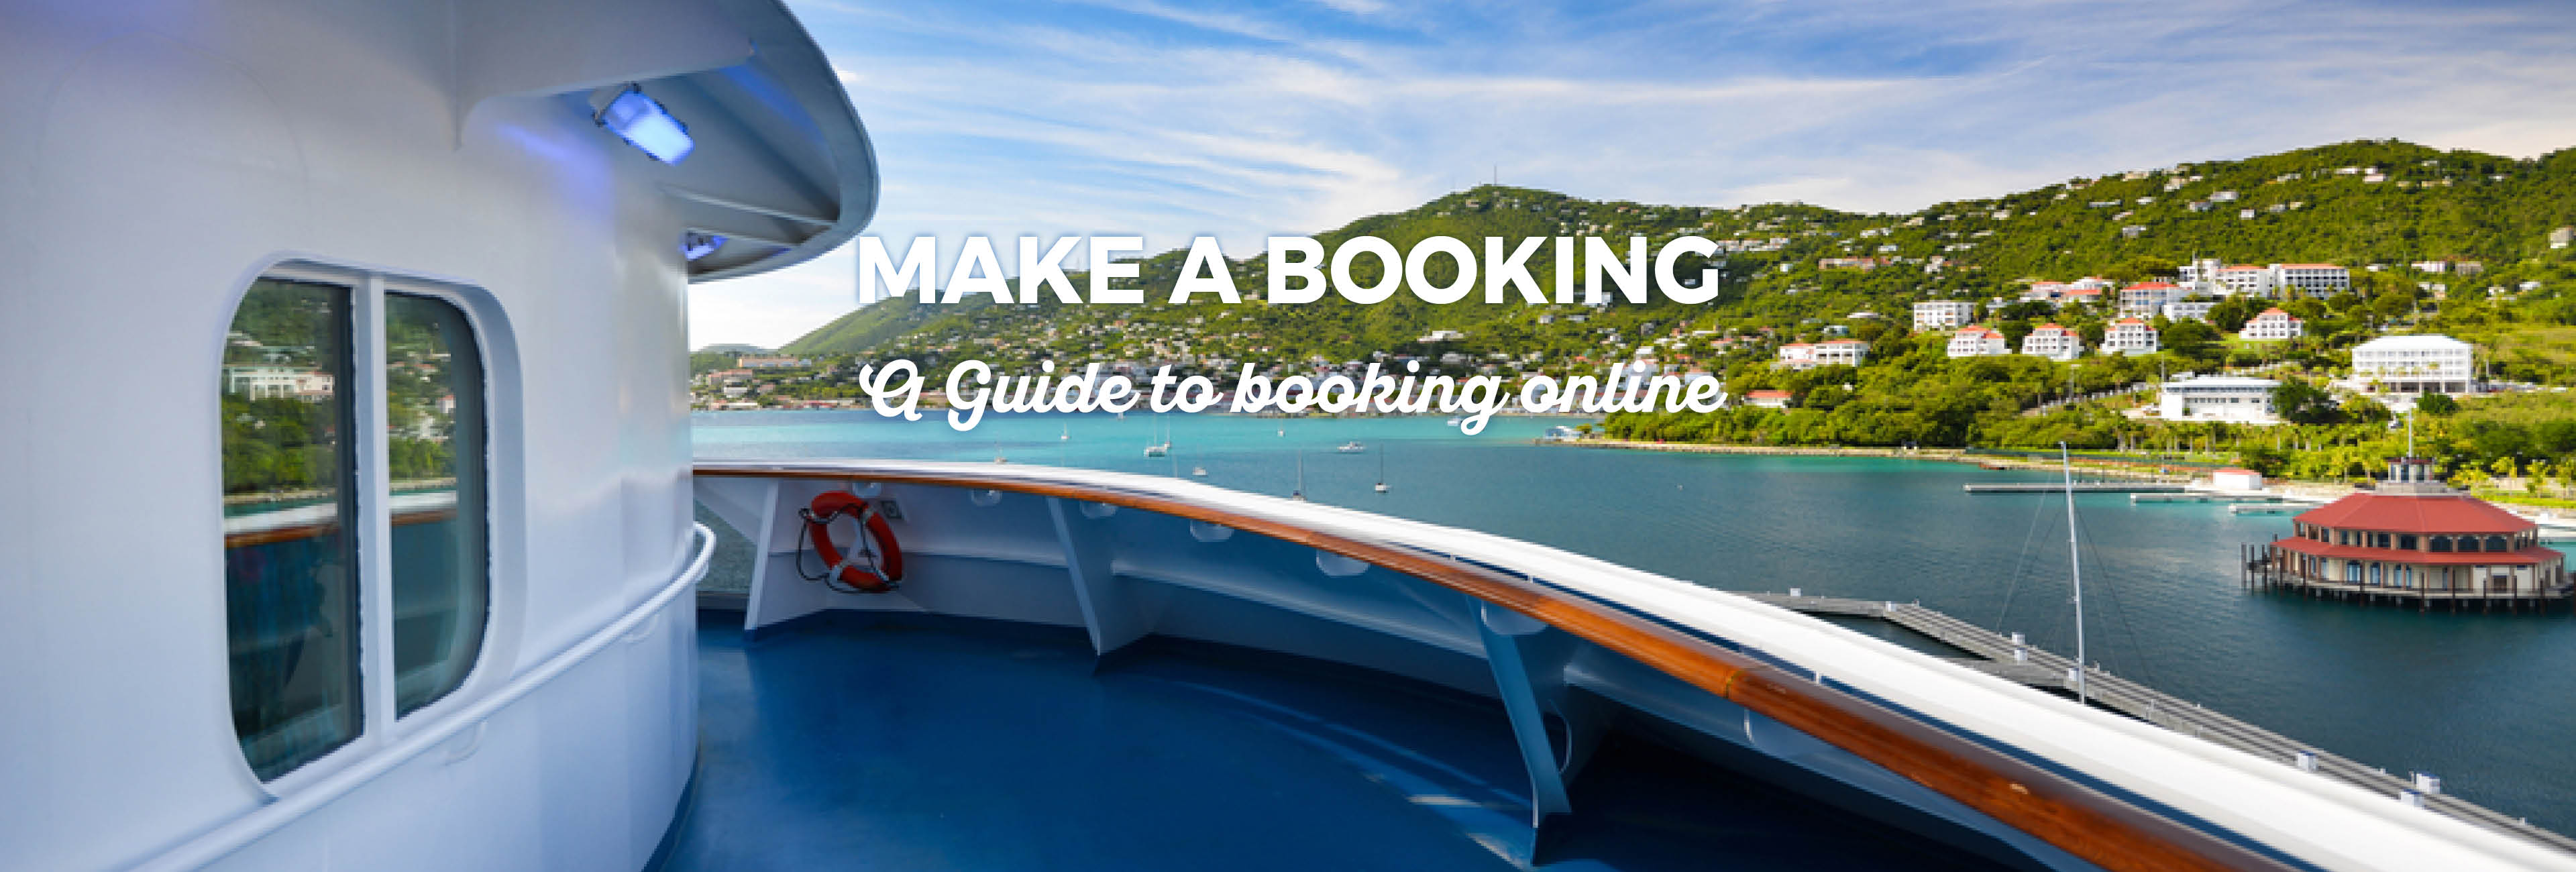 booking for cruises online